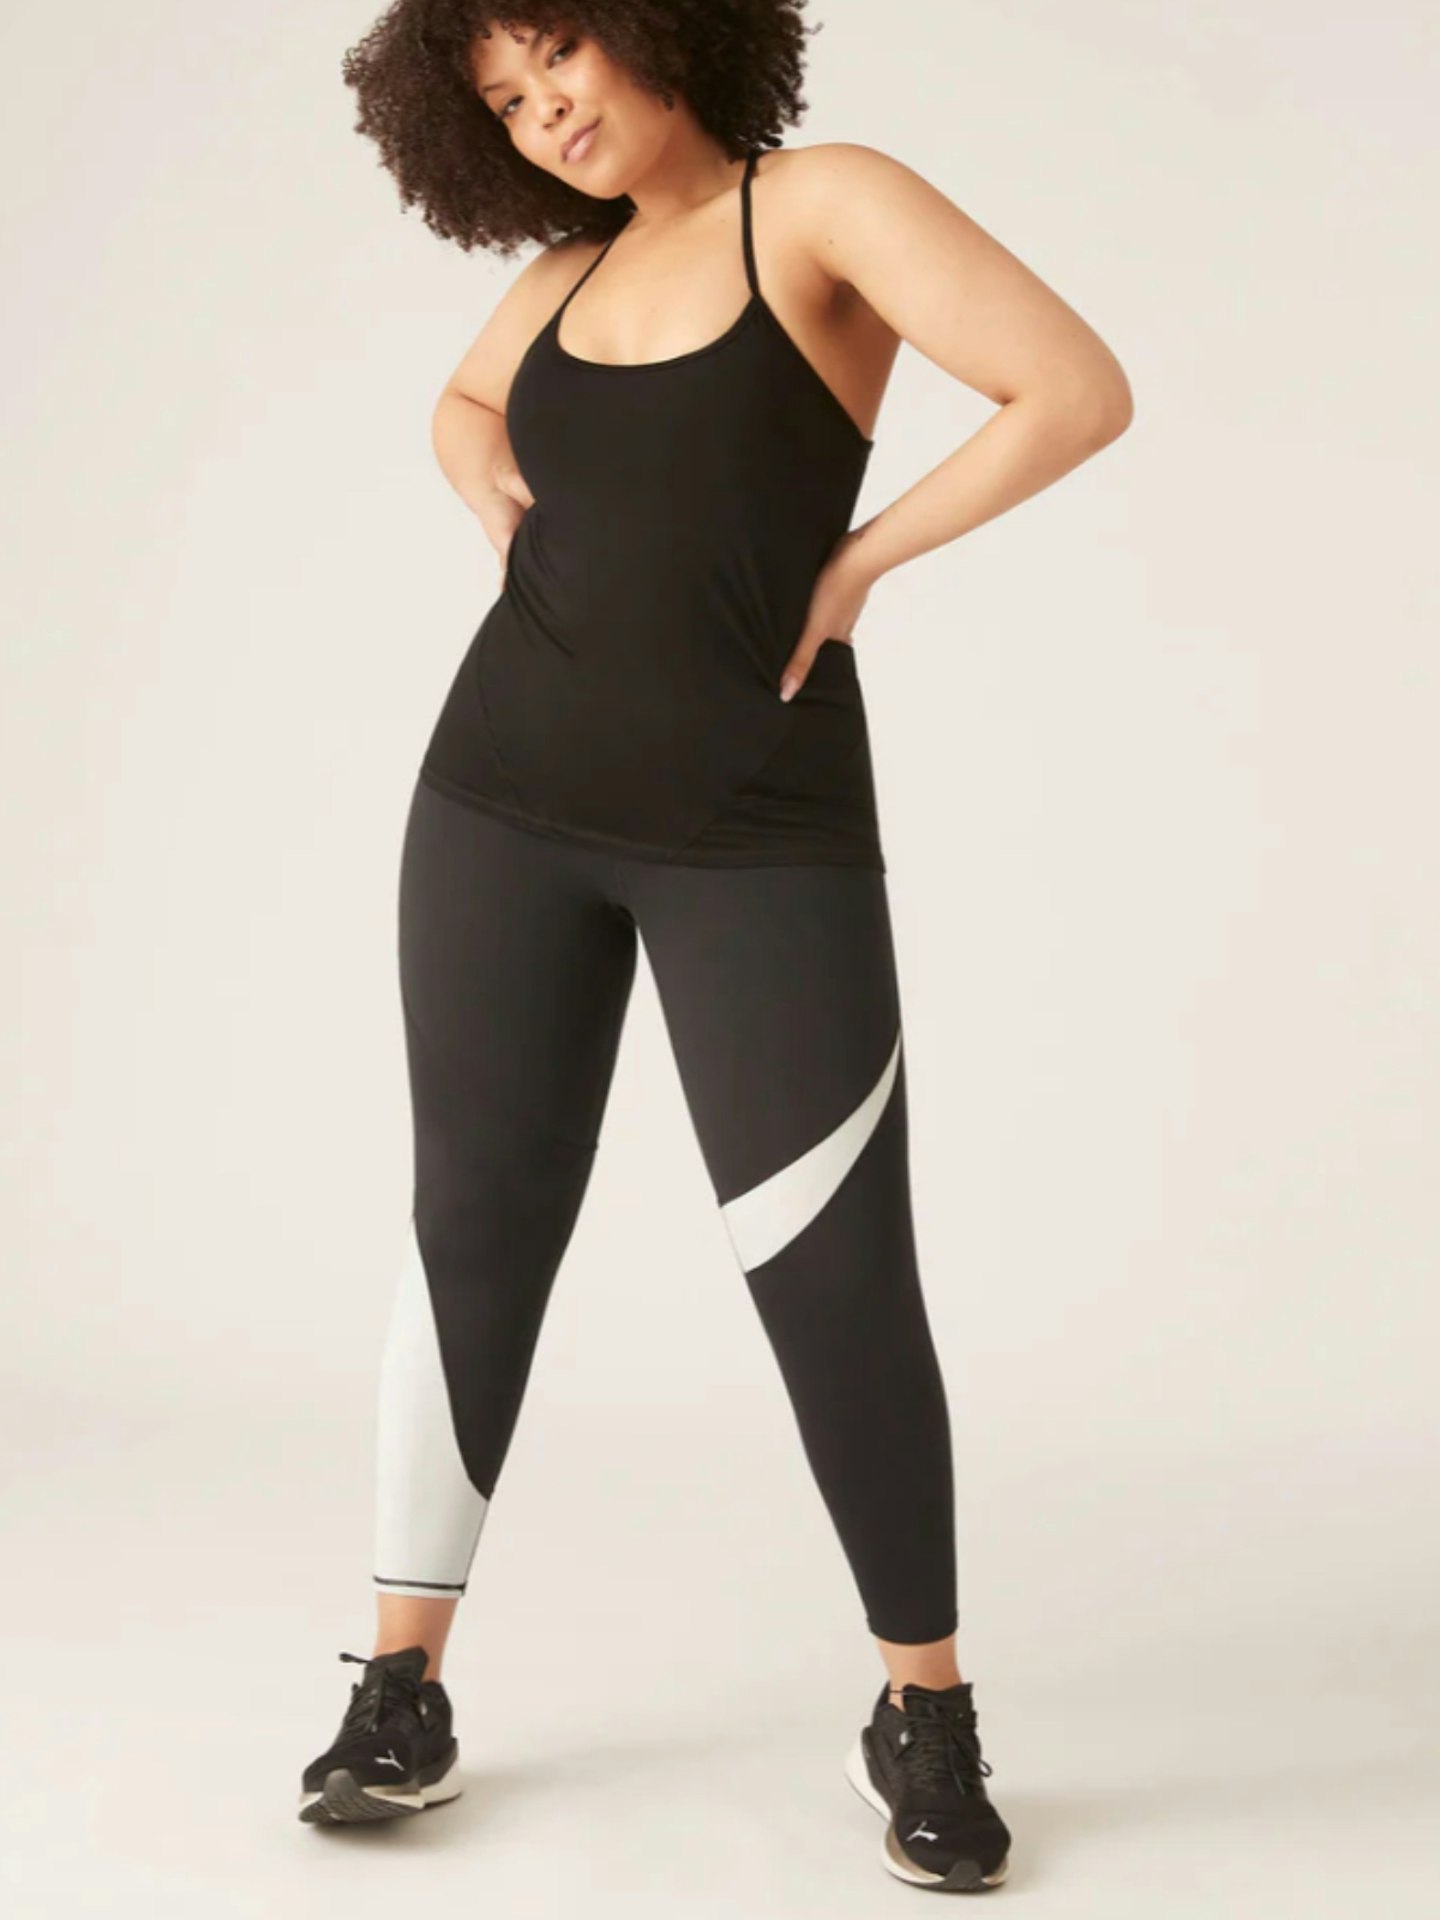 Modibodi period leggings review: Do they live up to the hype?